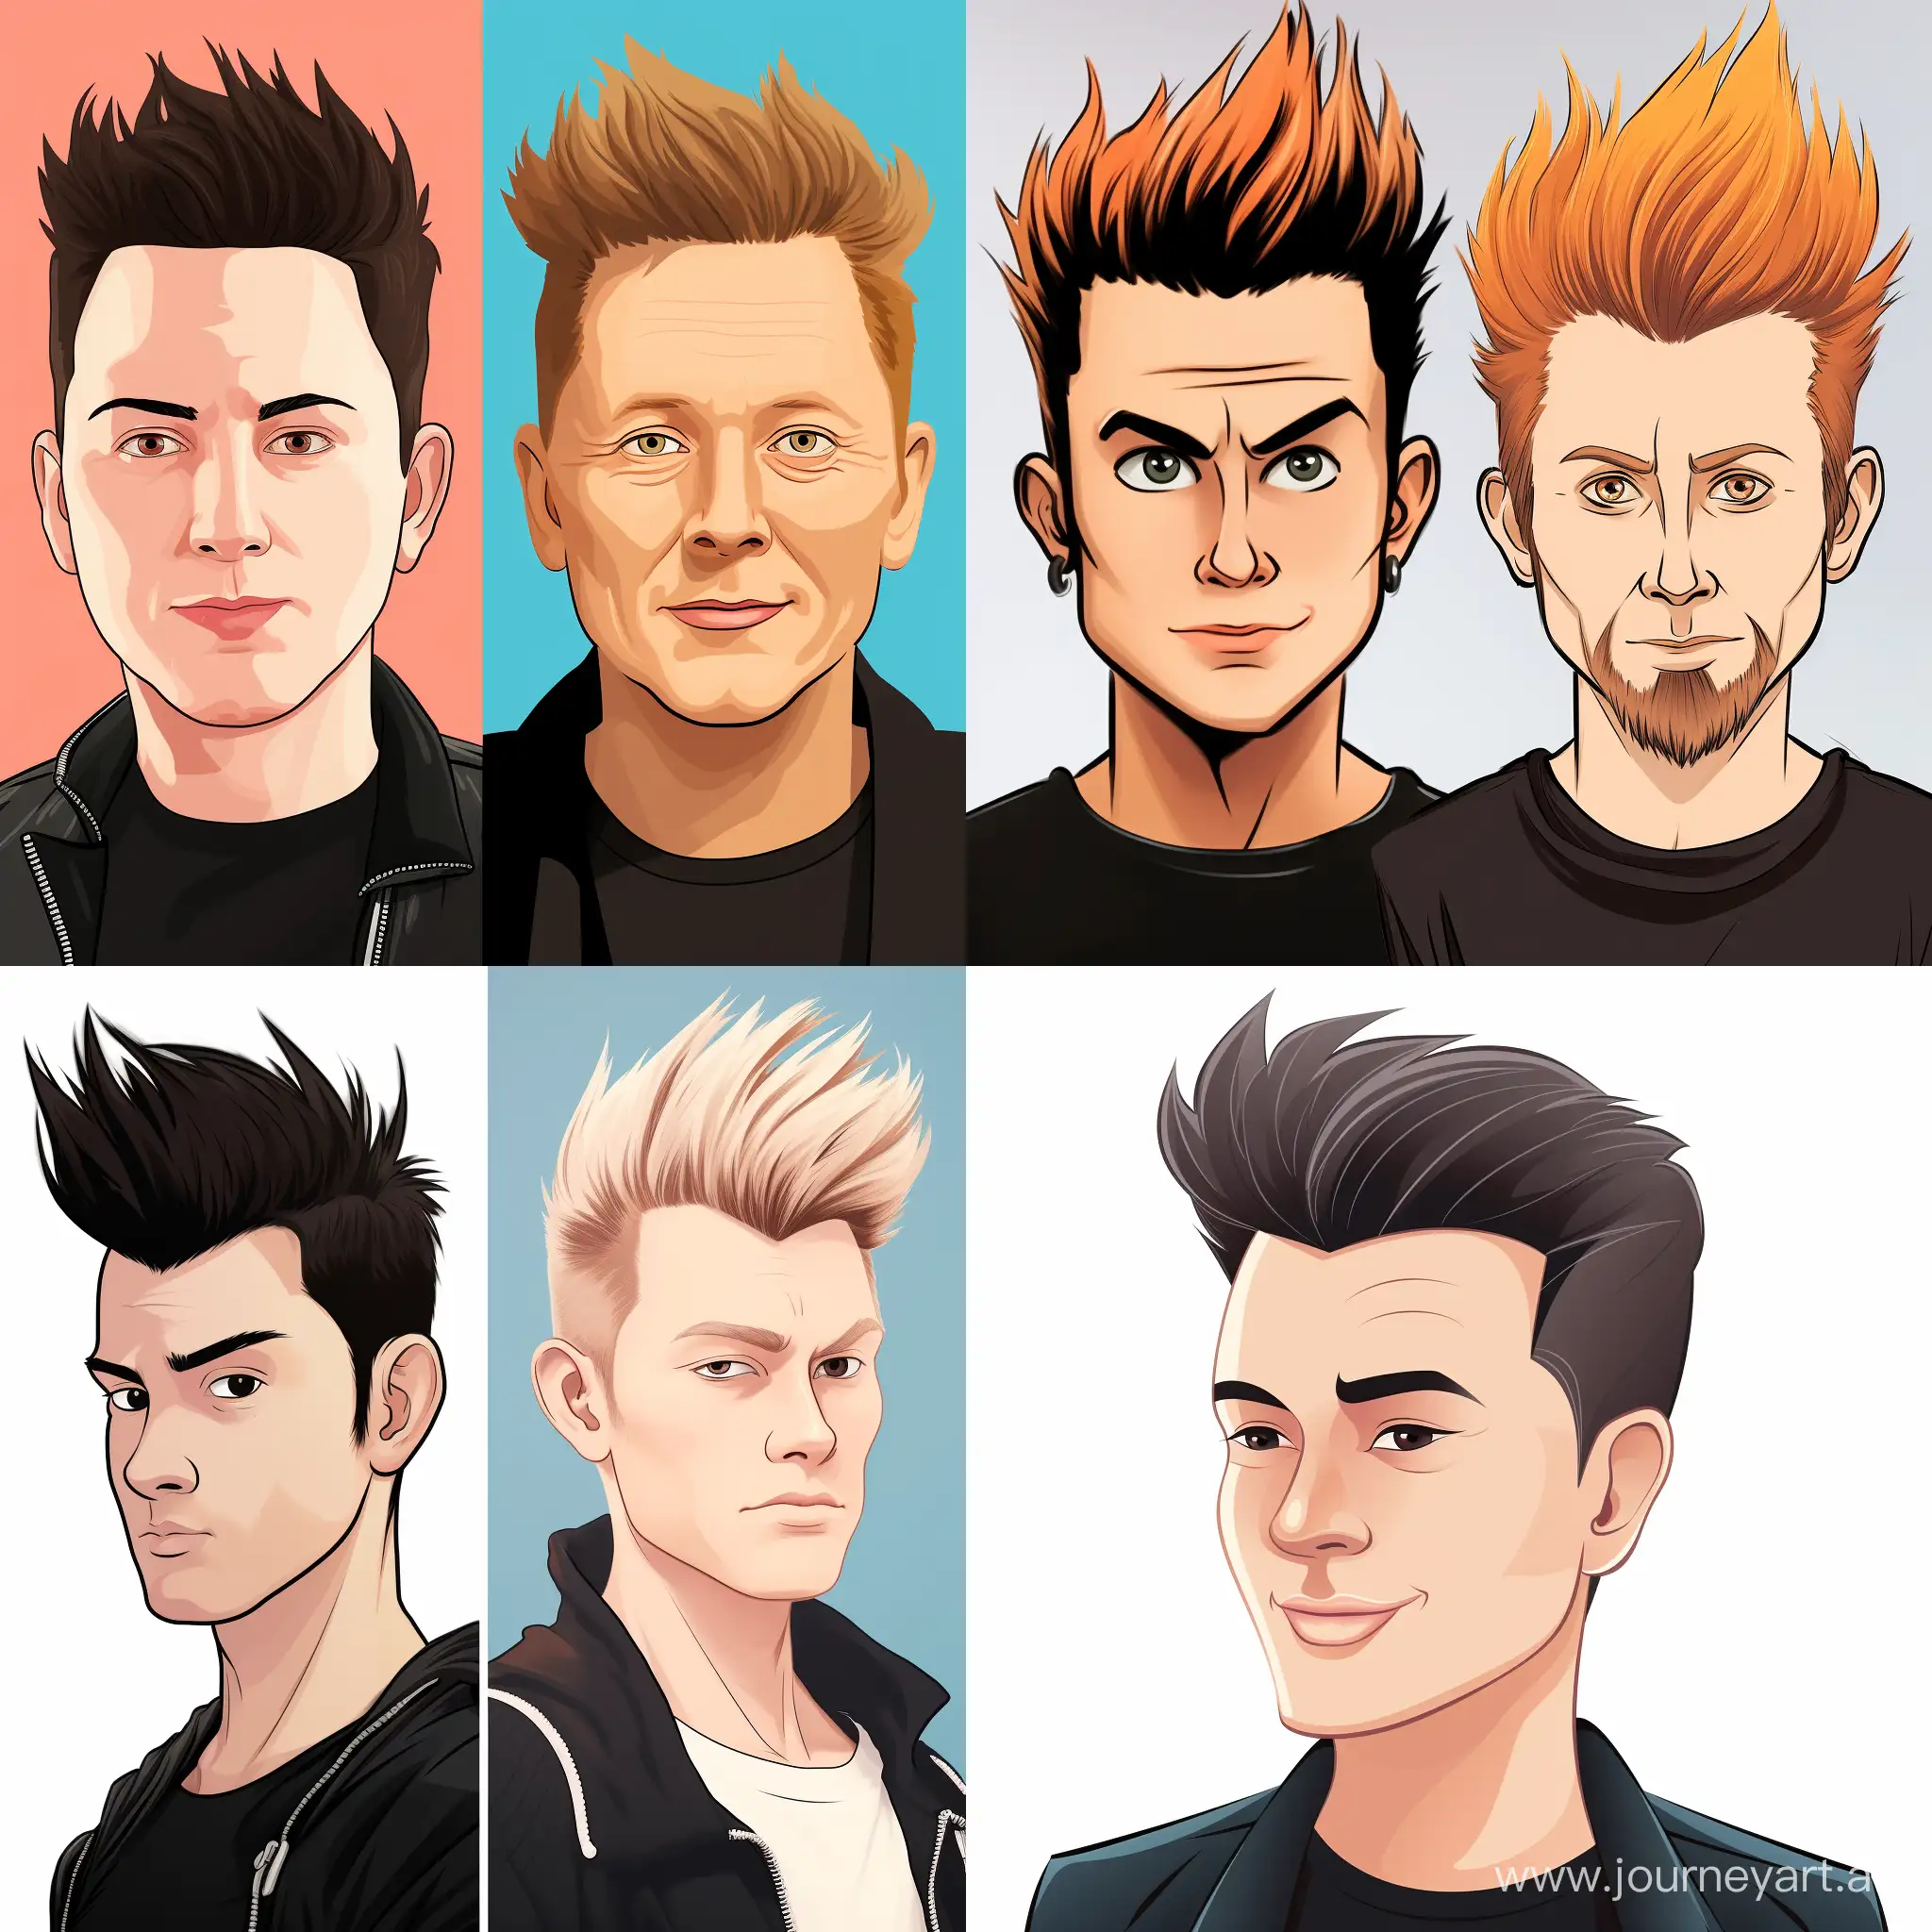 Elon-Musks-Fascinating-Bicolor-Quiff-Hairstyle-in-Playful-Cartoon-Style